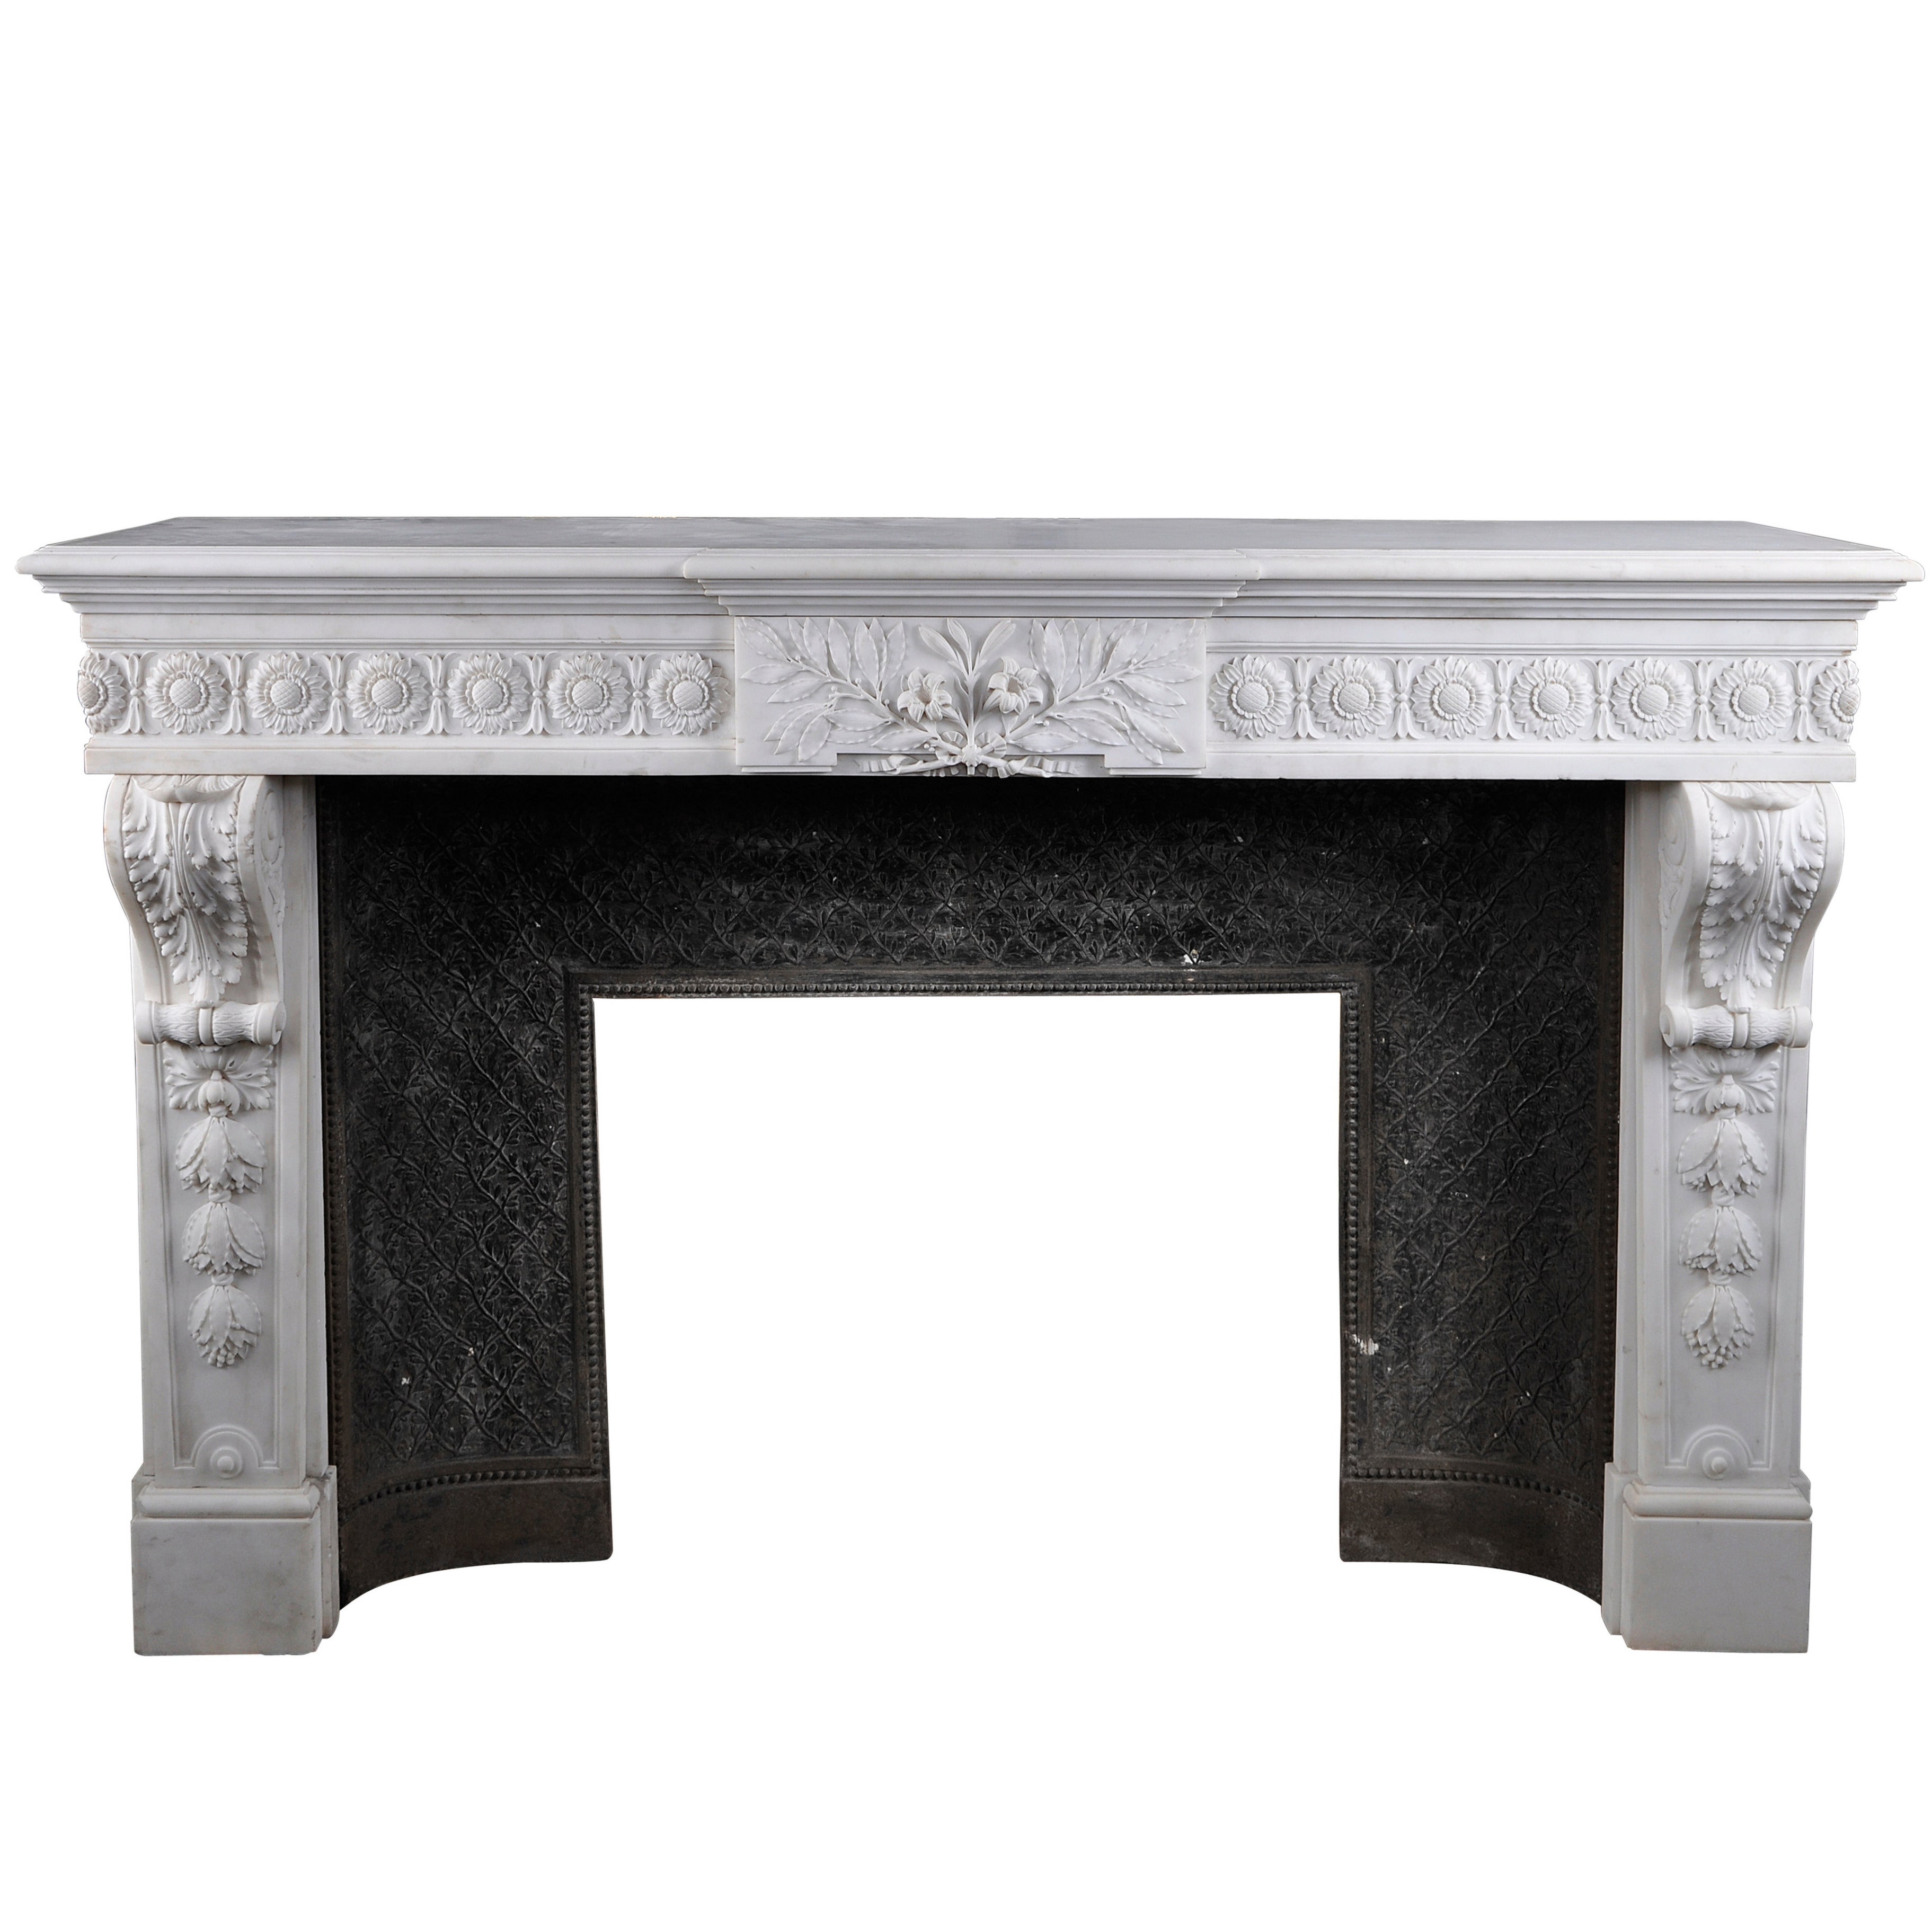 Louis XVI style fireplace after the model from the Petit Trianon, 19th c. For Sale